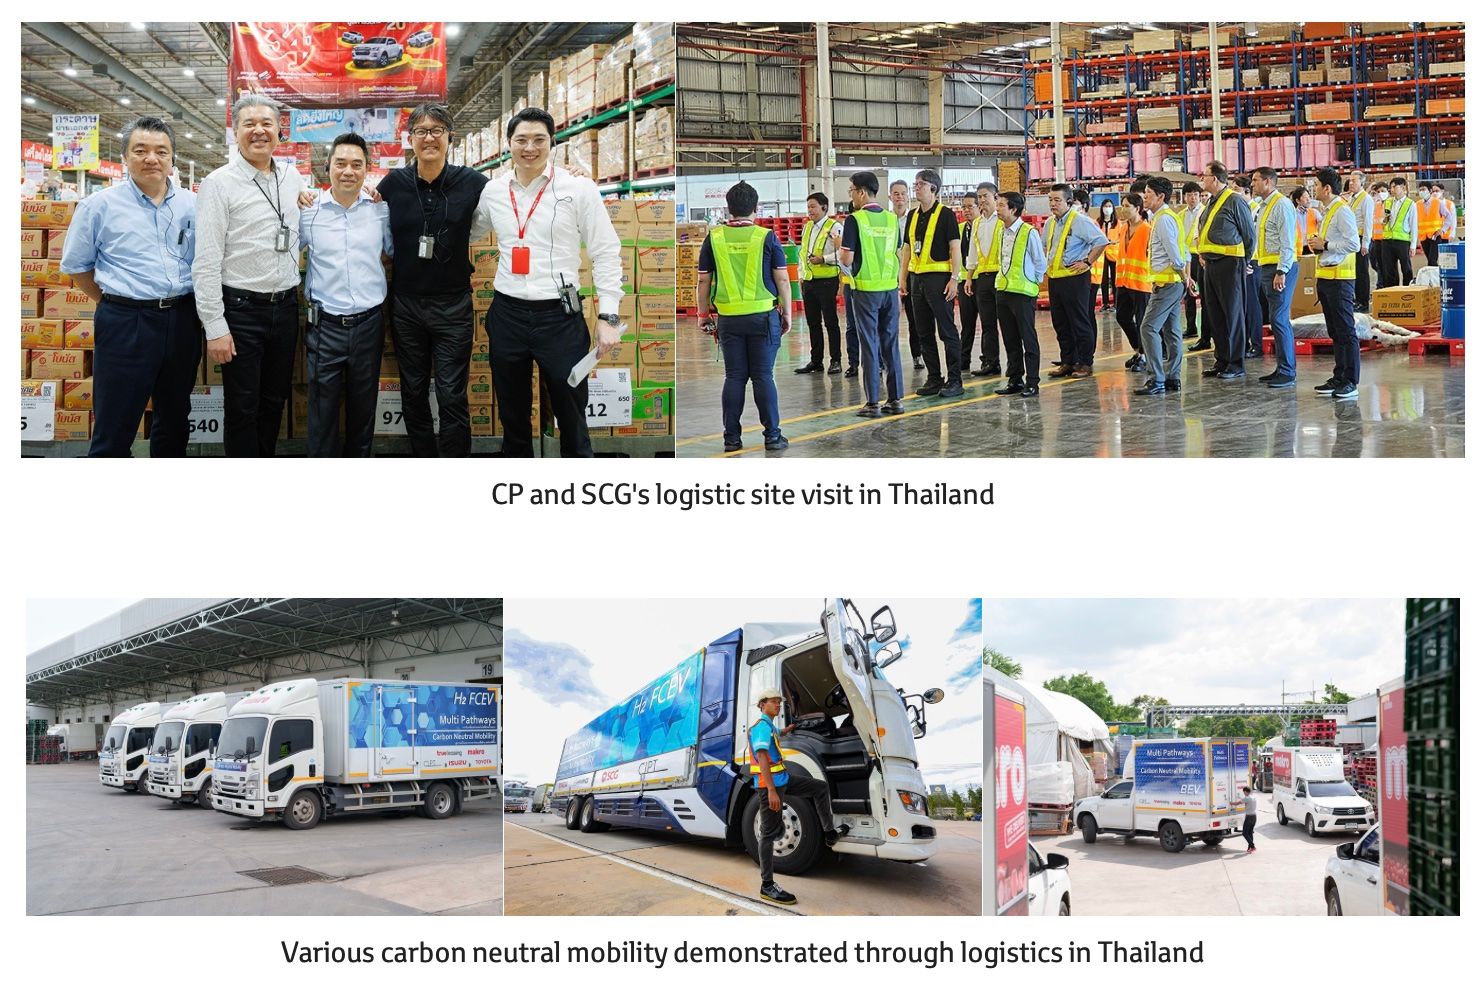 CP, True Leasing, SCG, Toyota, and CJPT sign Memorandum of Understanding to Further Accelerate Cross-Industry Efforts Towards Achieving Carbon Neutrality in Thailand leasing PlatoBlockchain Data Intelligence. Vertical Search. Ai.